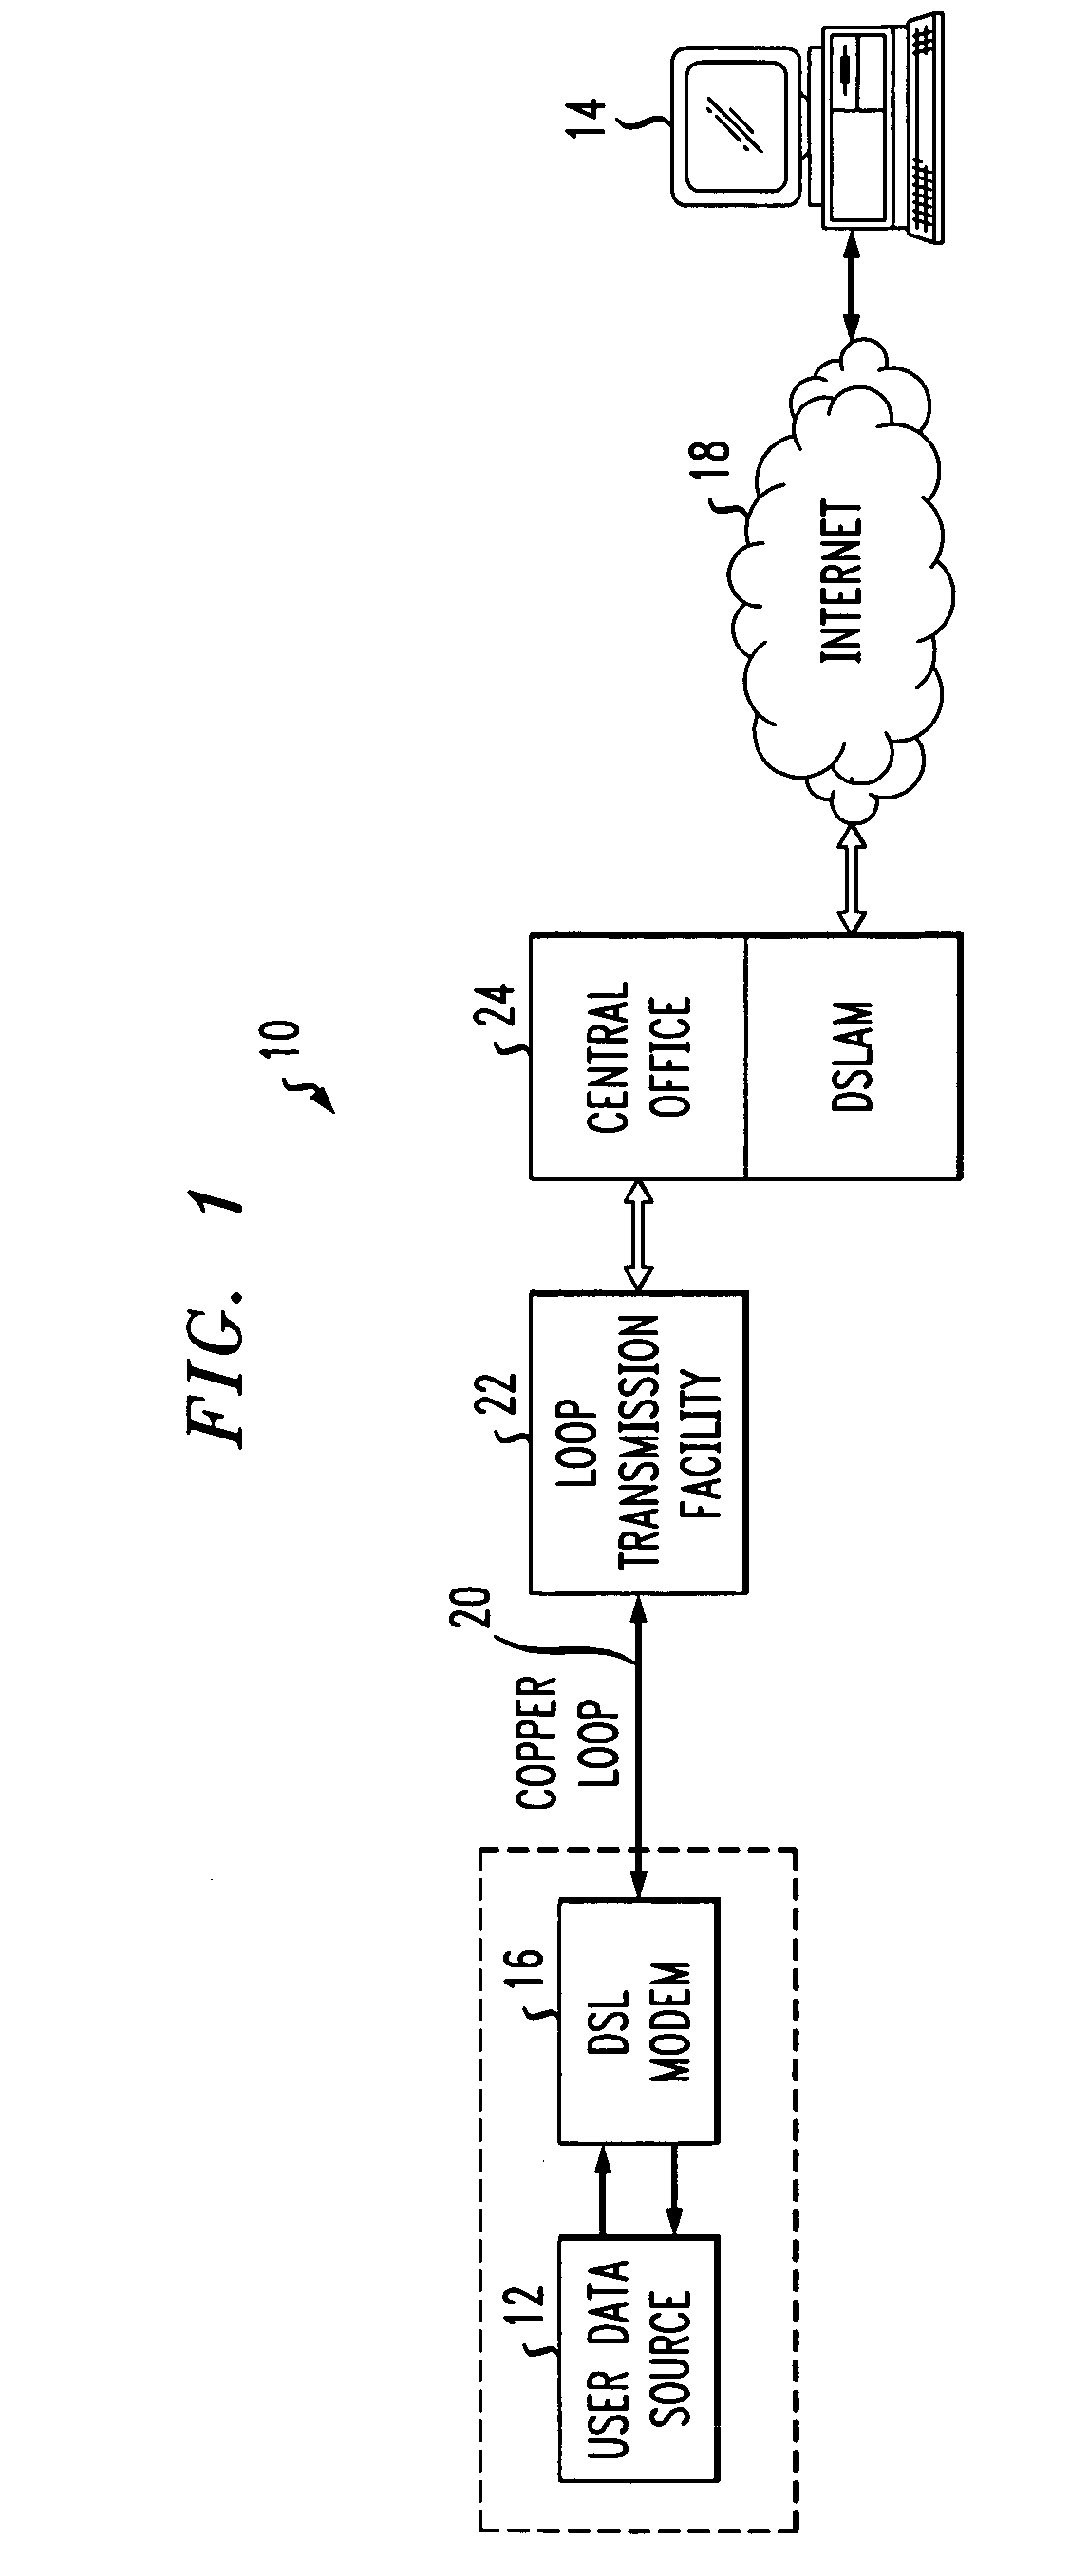 Multi-frequency data transmission channel power allocation